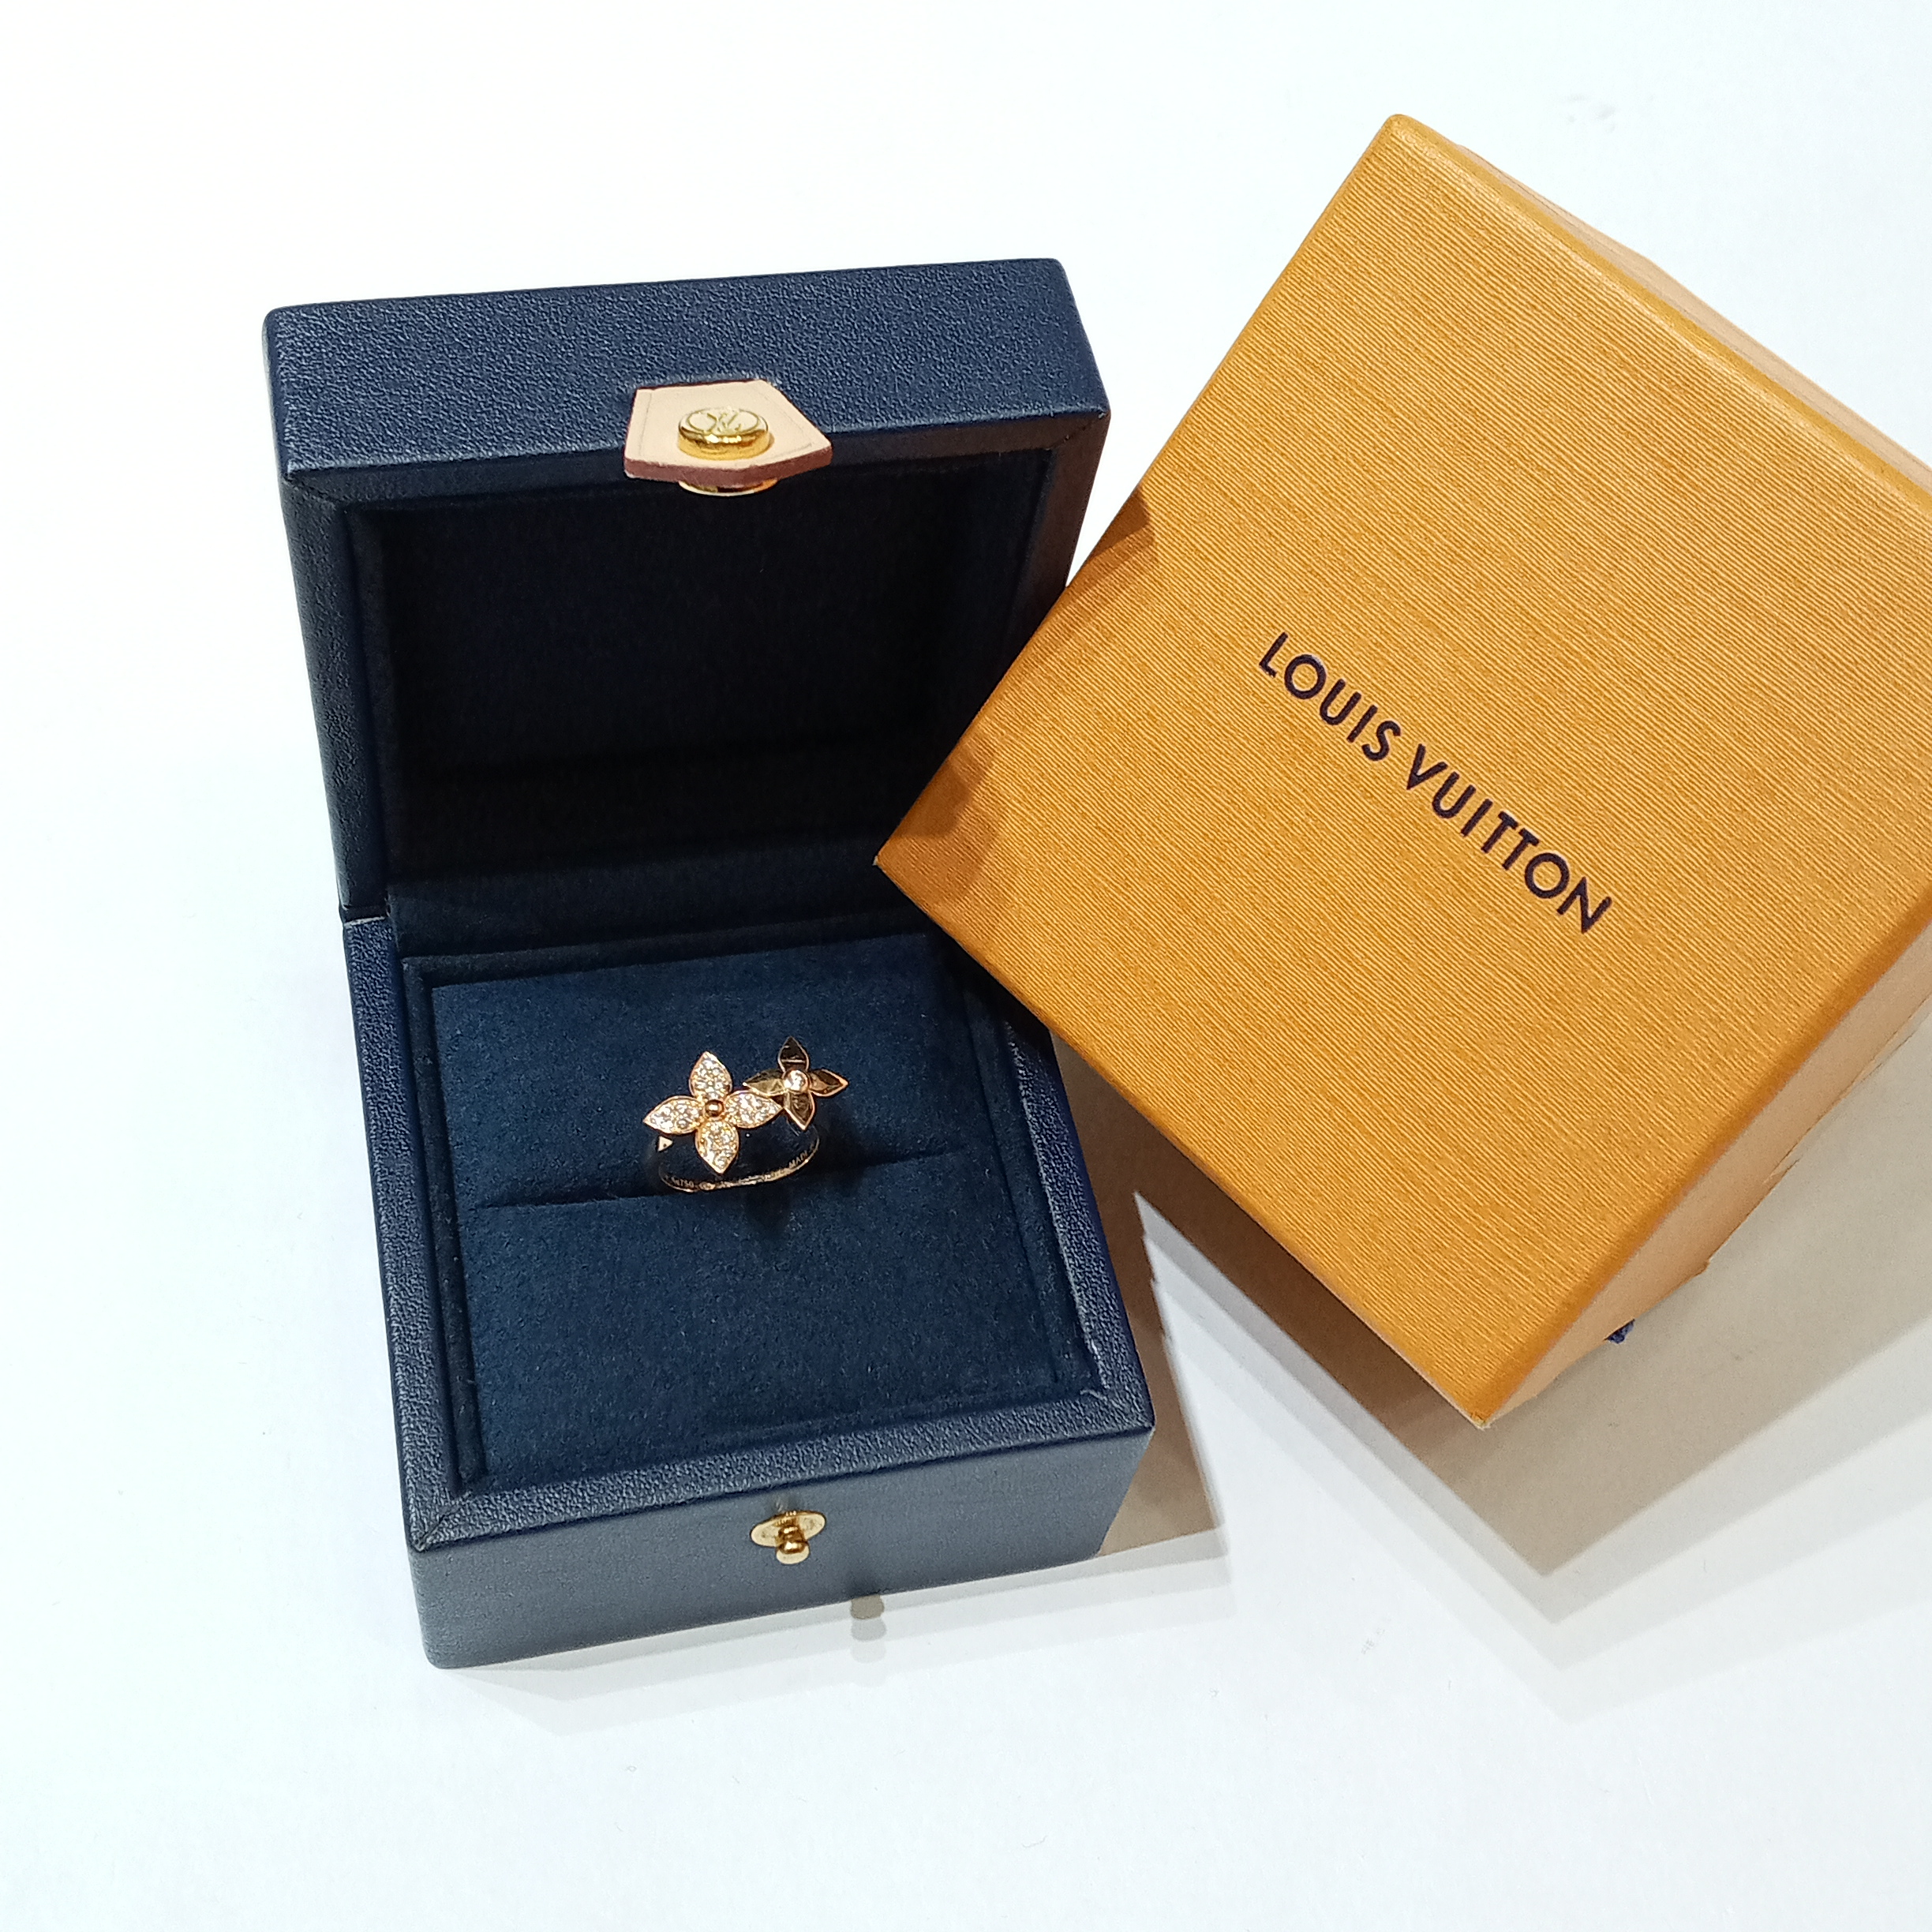 Louis Vuitton Monogram Ring - Size 7  Rent Louis Vuitton jewelry for  $55/month